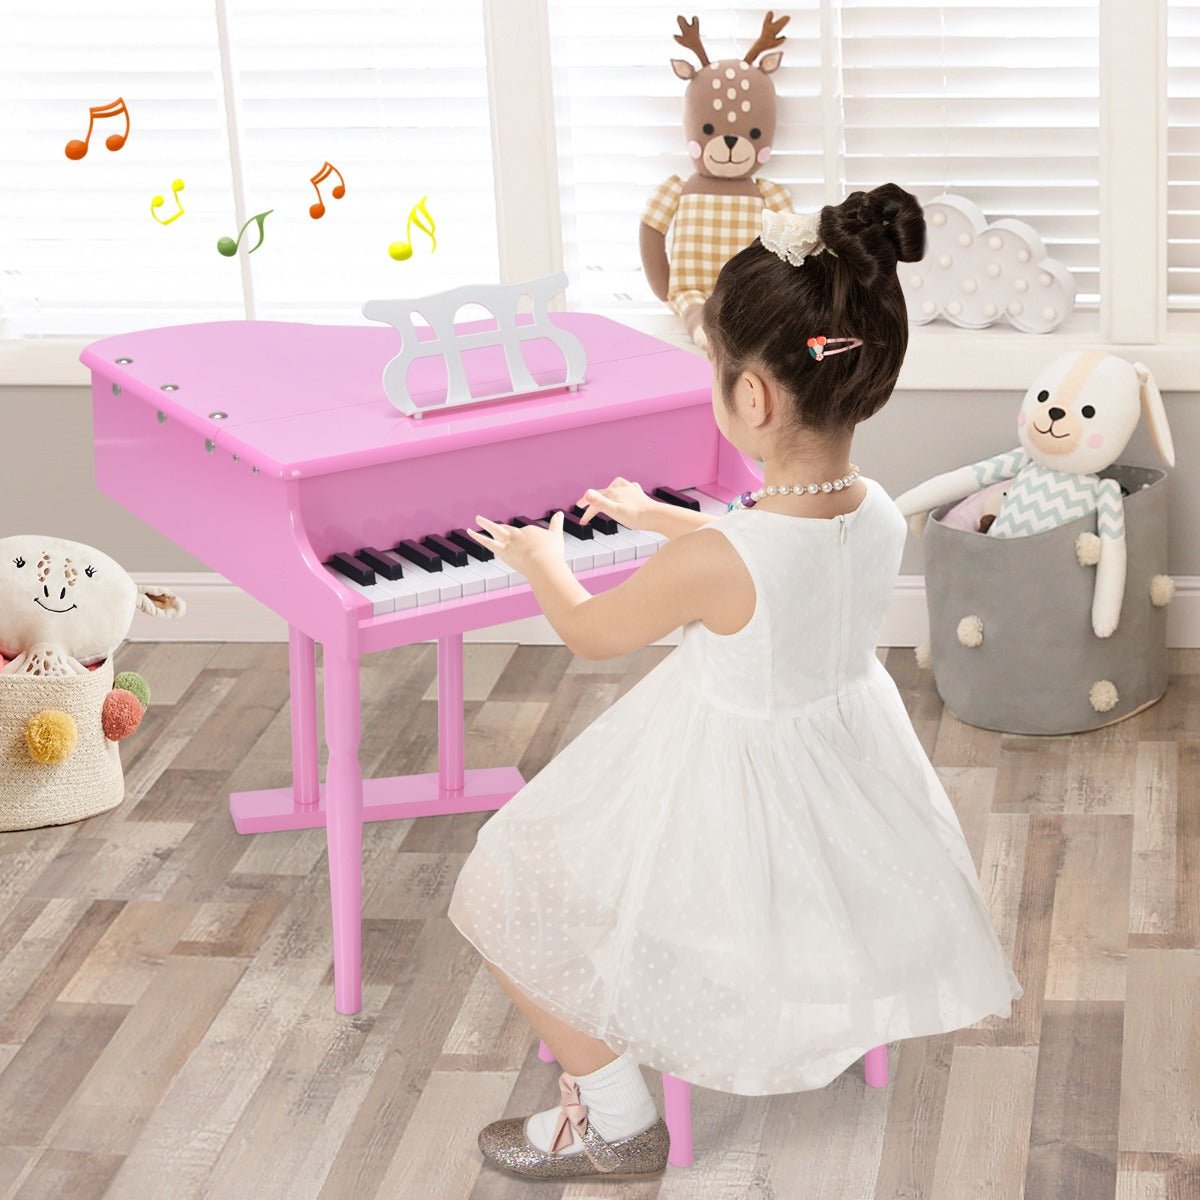 Buy the Kids Piano Keyboard with Sheet Music Stand